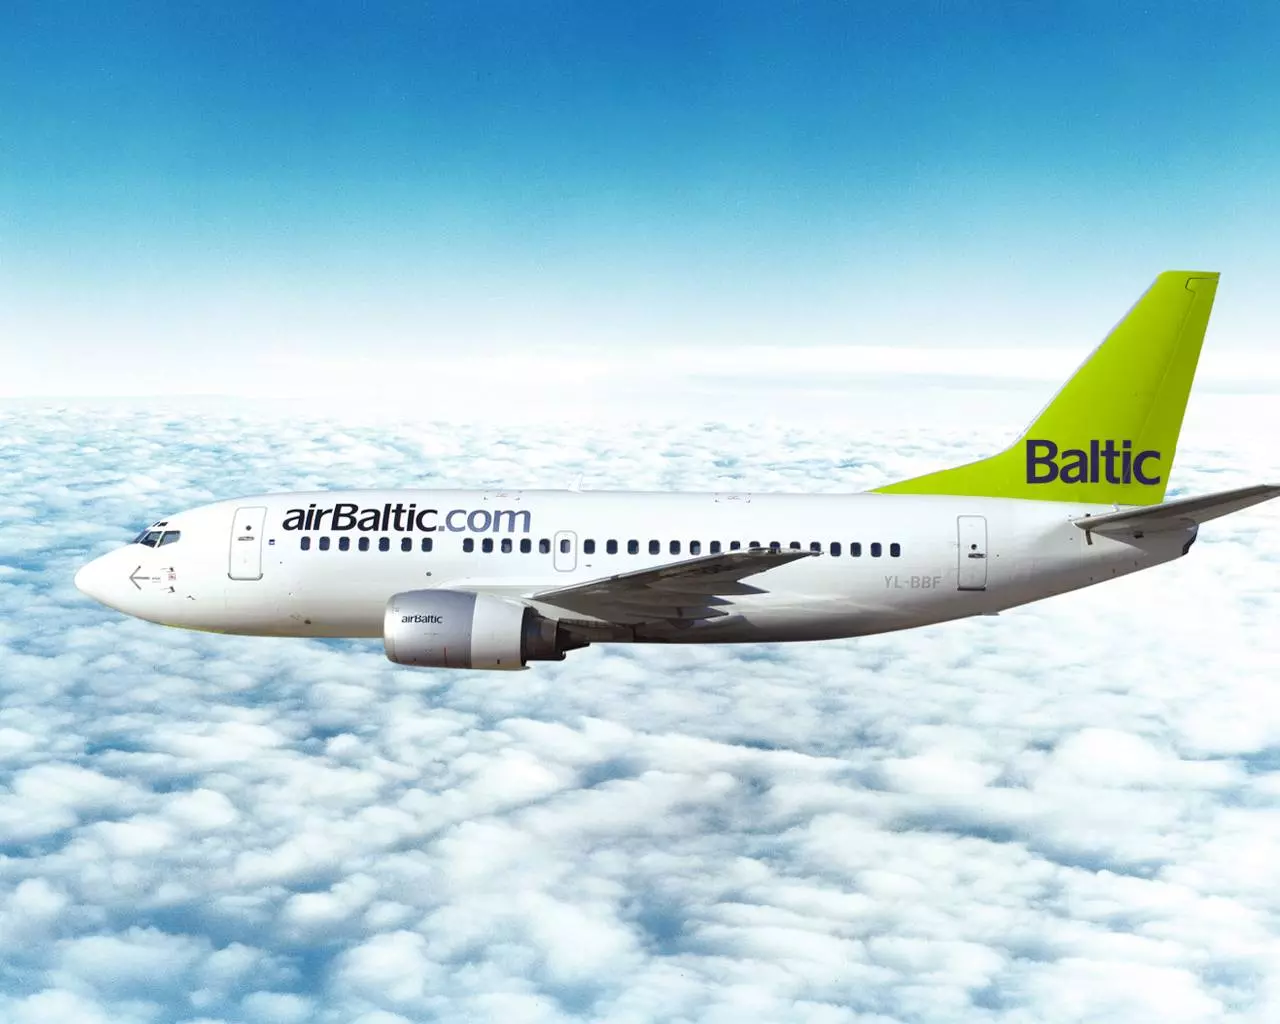 Airbaltic - collect stamps and earn rewards while traveling